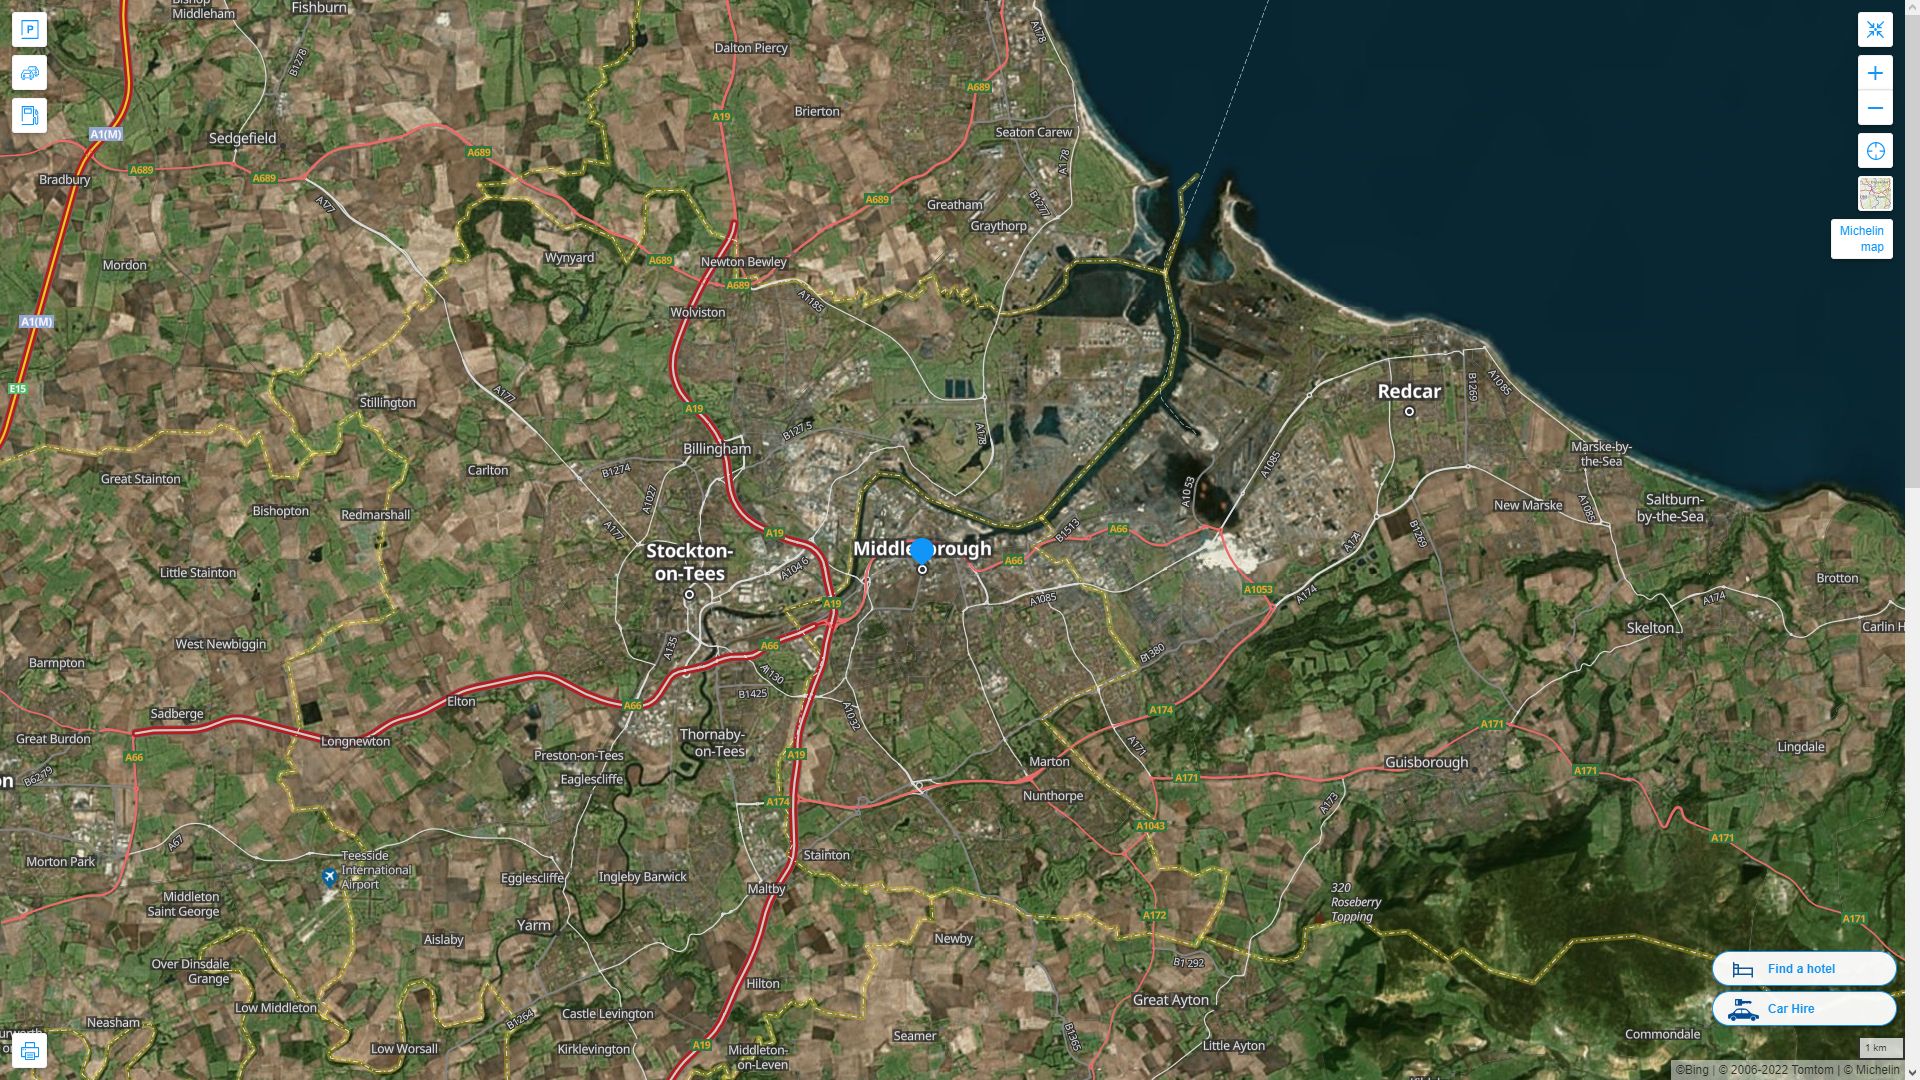 Middlesbrough Highway and Road Map with Satellite View